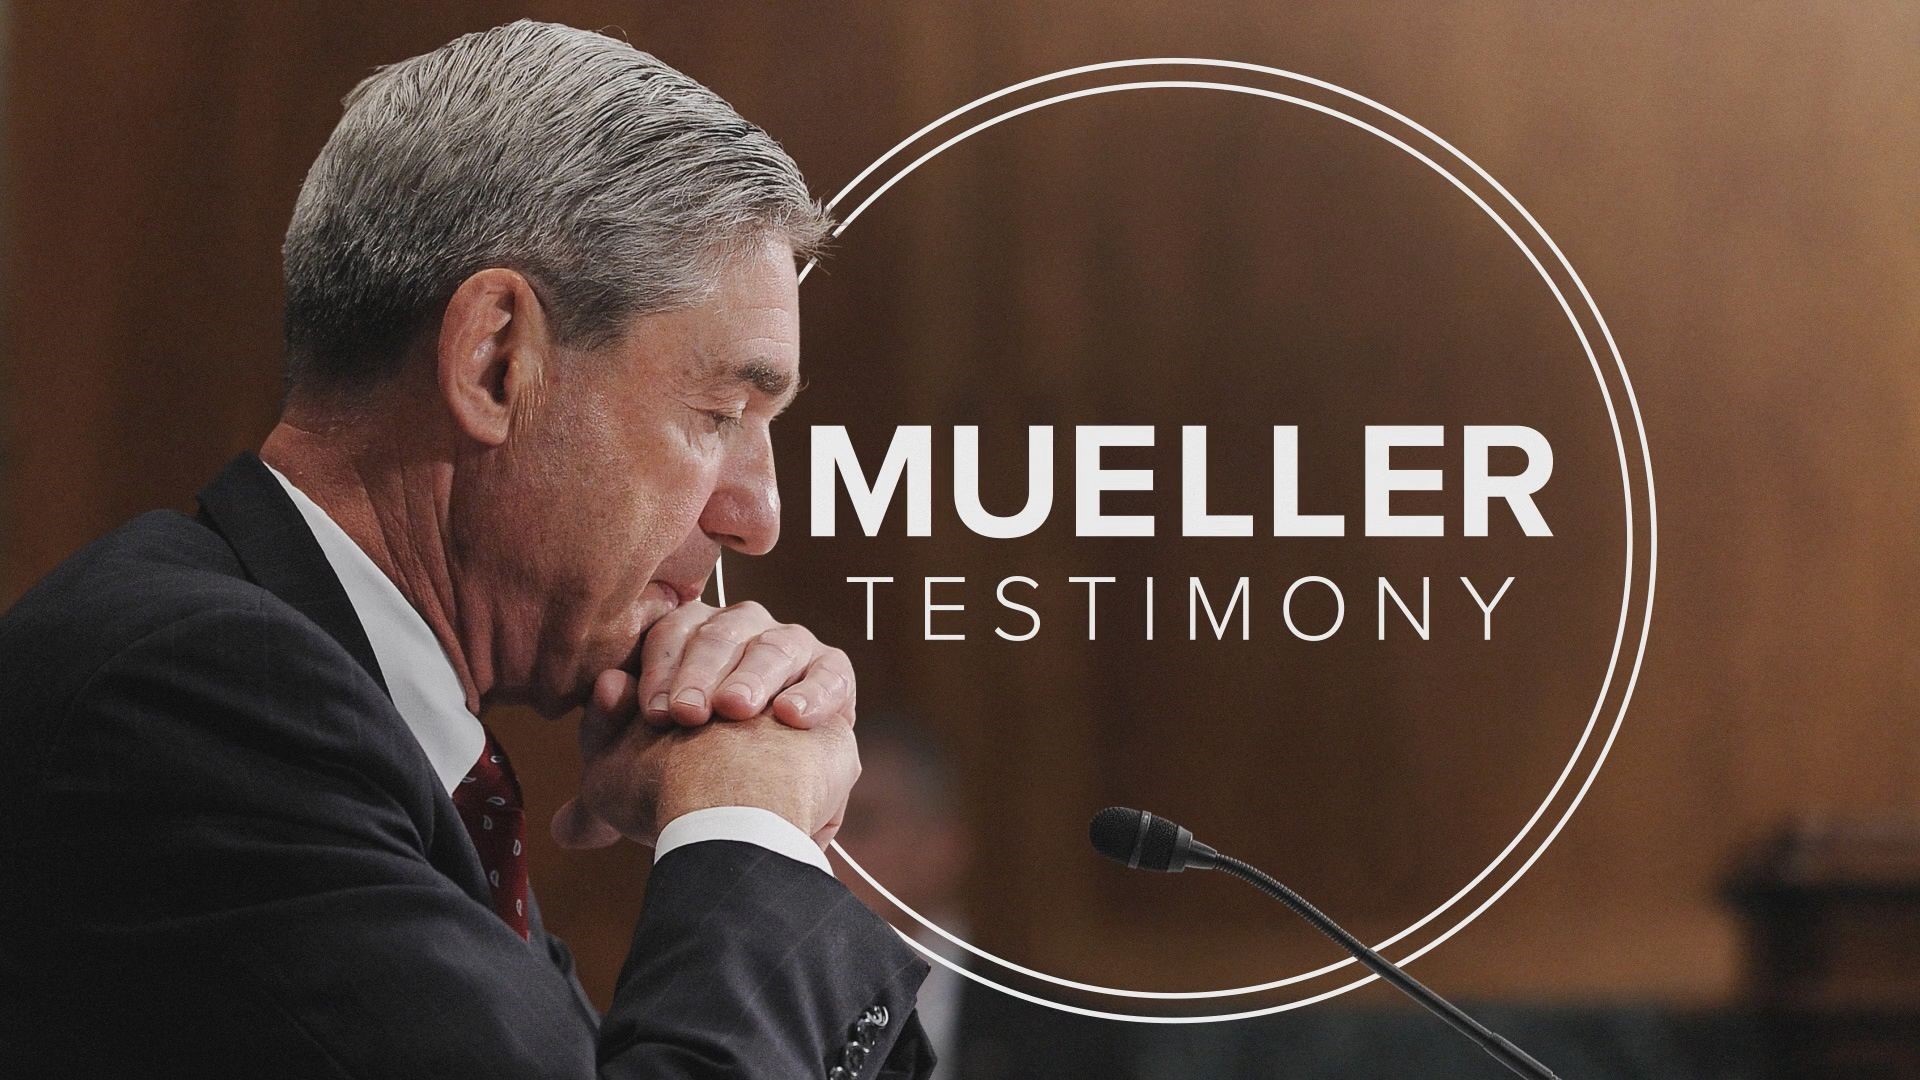 I was asked to watch the Robert Mueller hearing by my bosses, so i did. It went pretty much as I expected, although Mueller did elaborate more on some questions instead of giving the expected yes and nos.